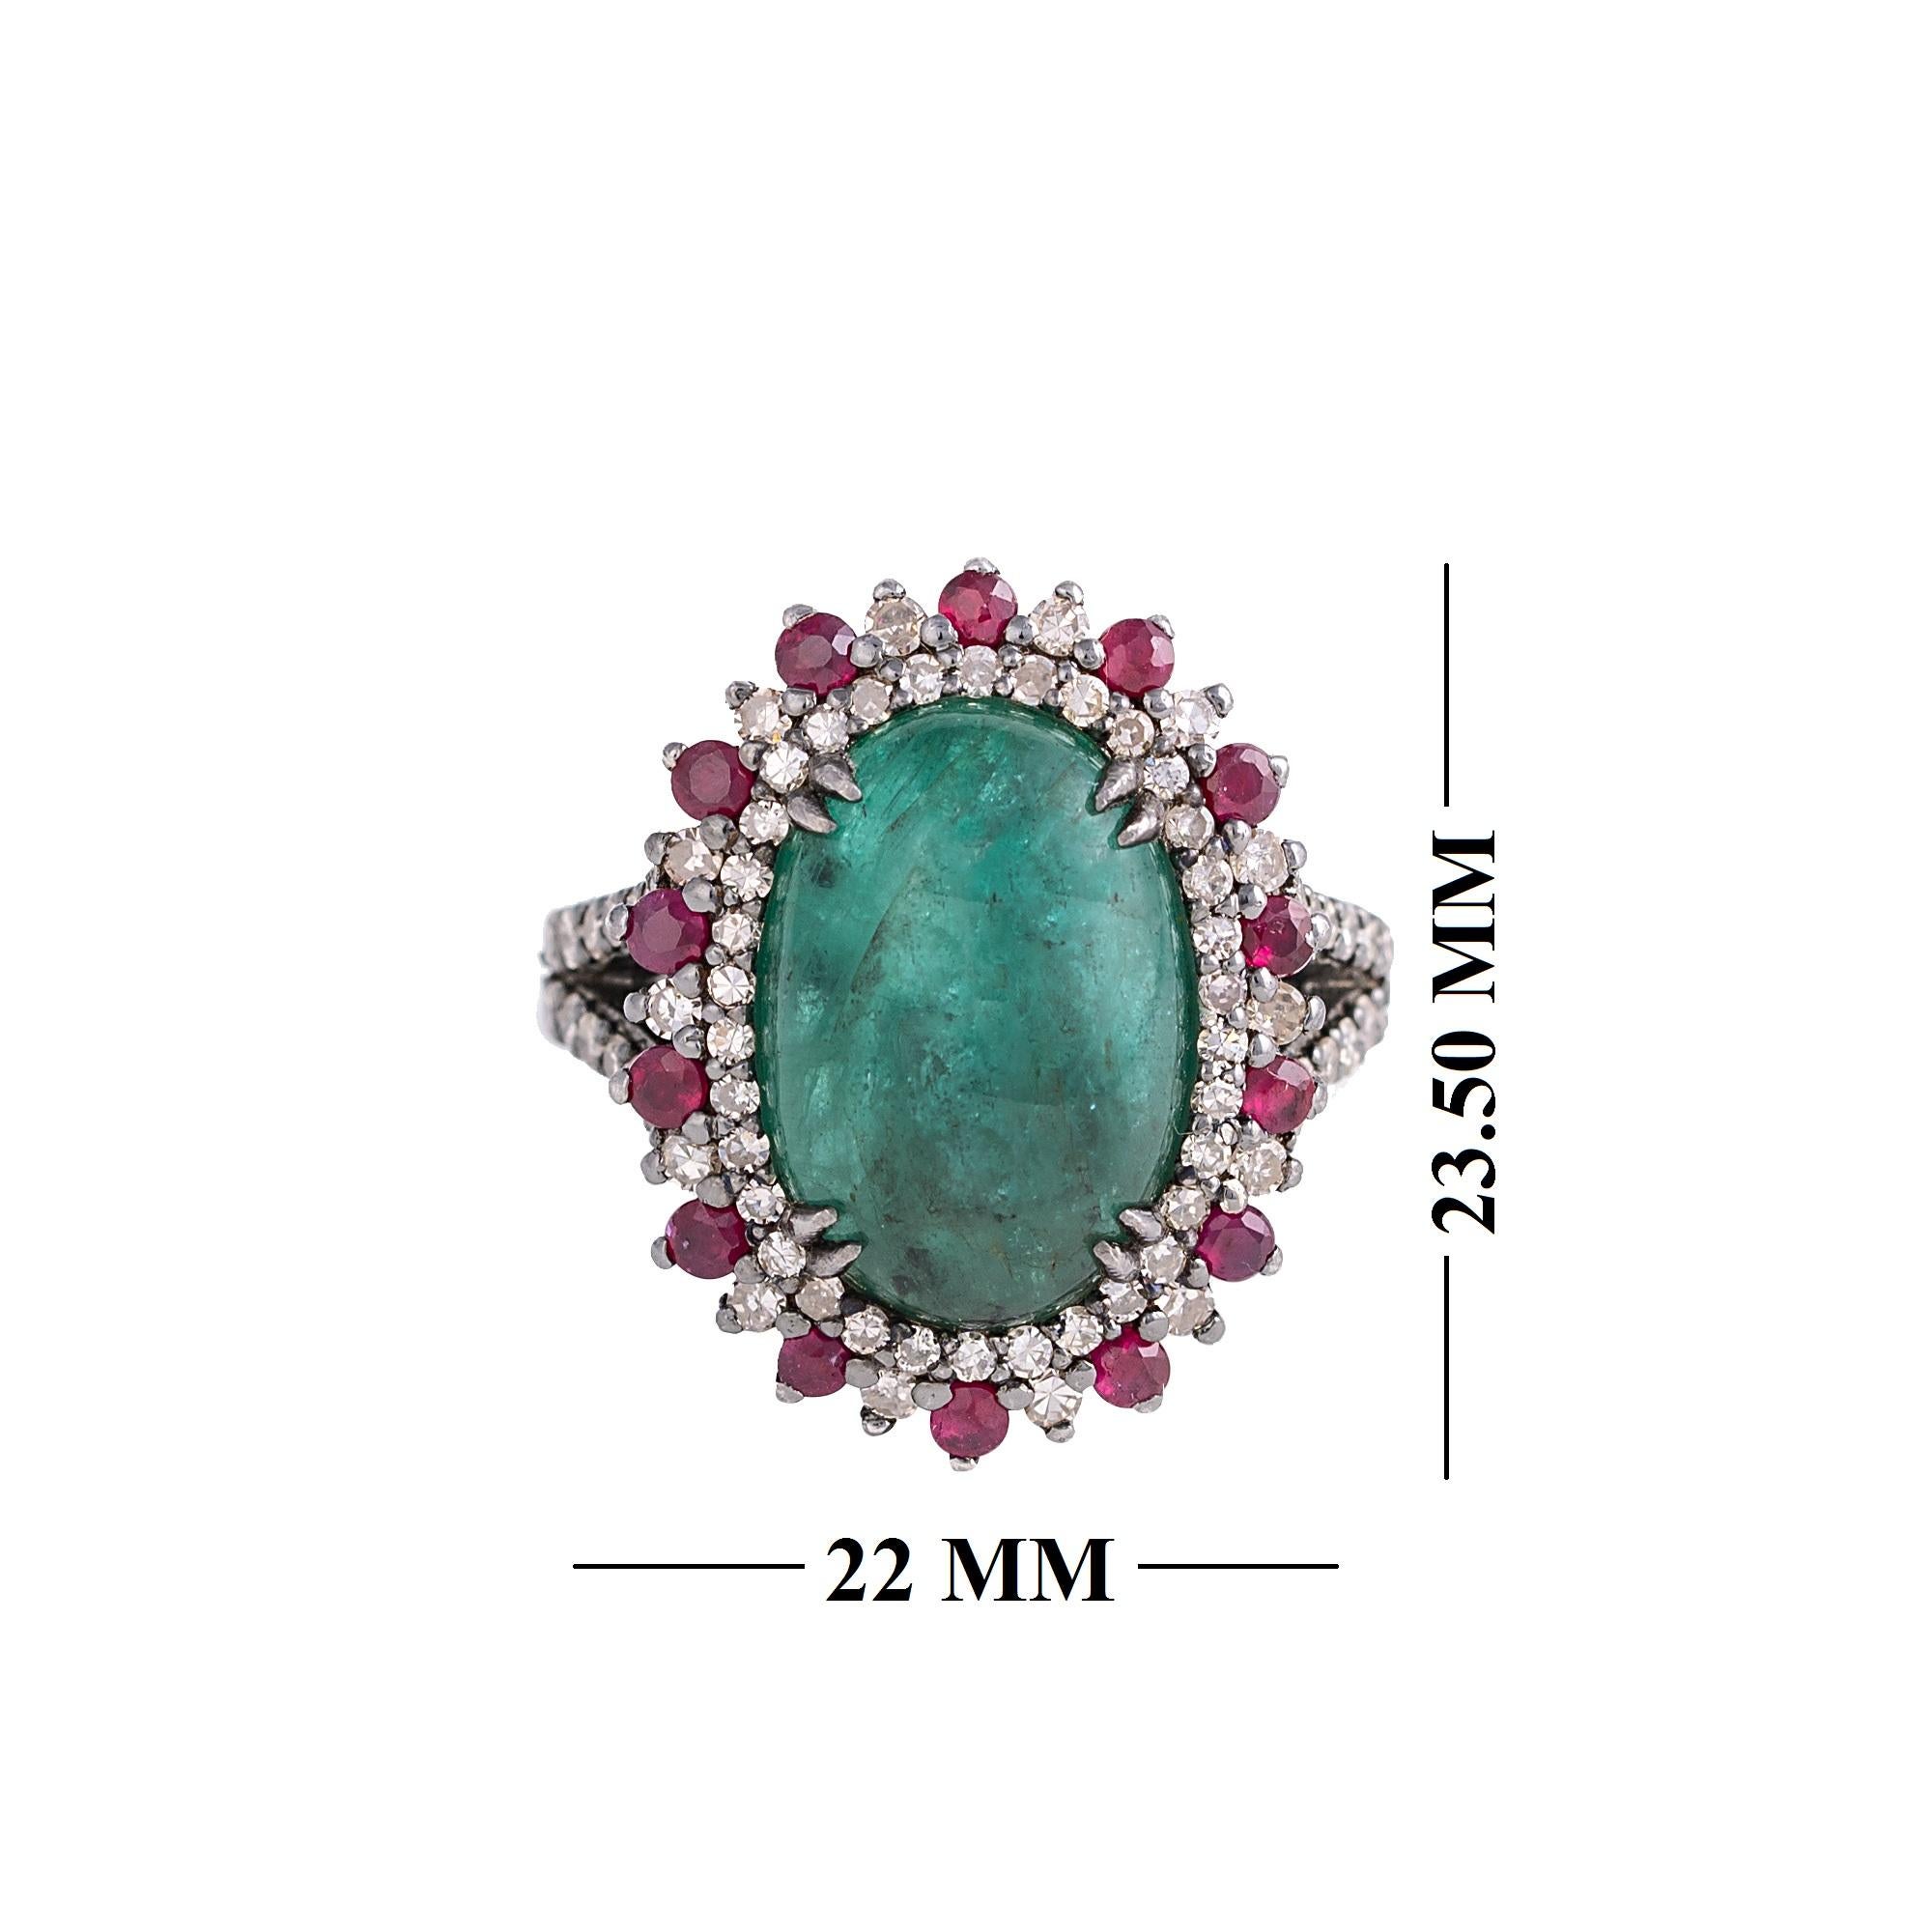 7.70 Carat Cabochon-Cut Emerald, Diamond, and Ruby Cocktail Ring in Art-Deco For Sale 2